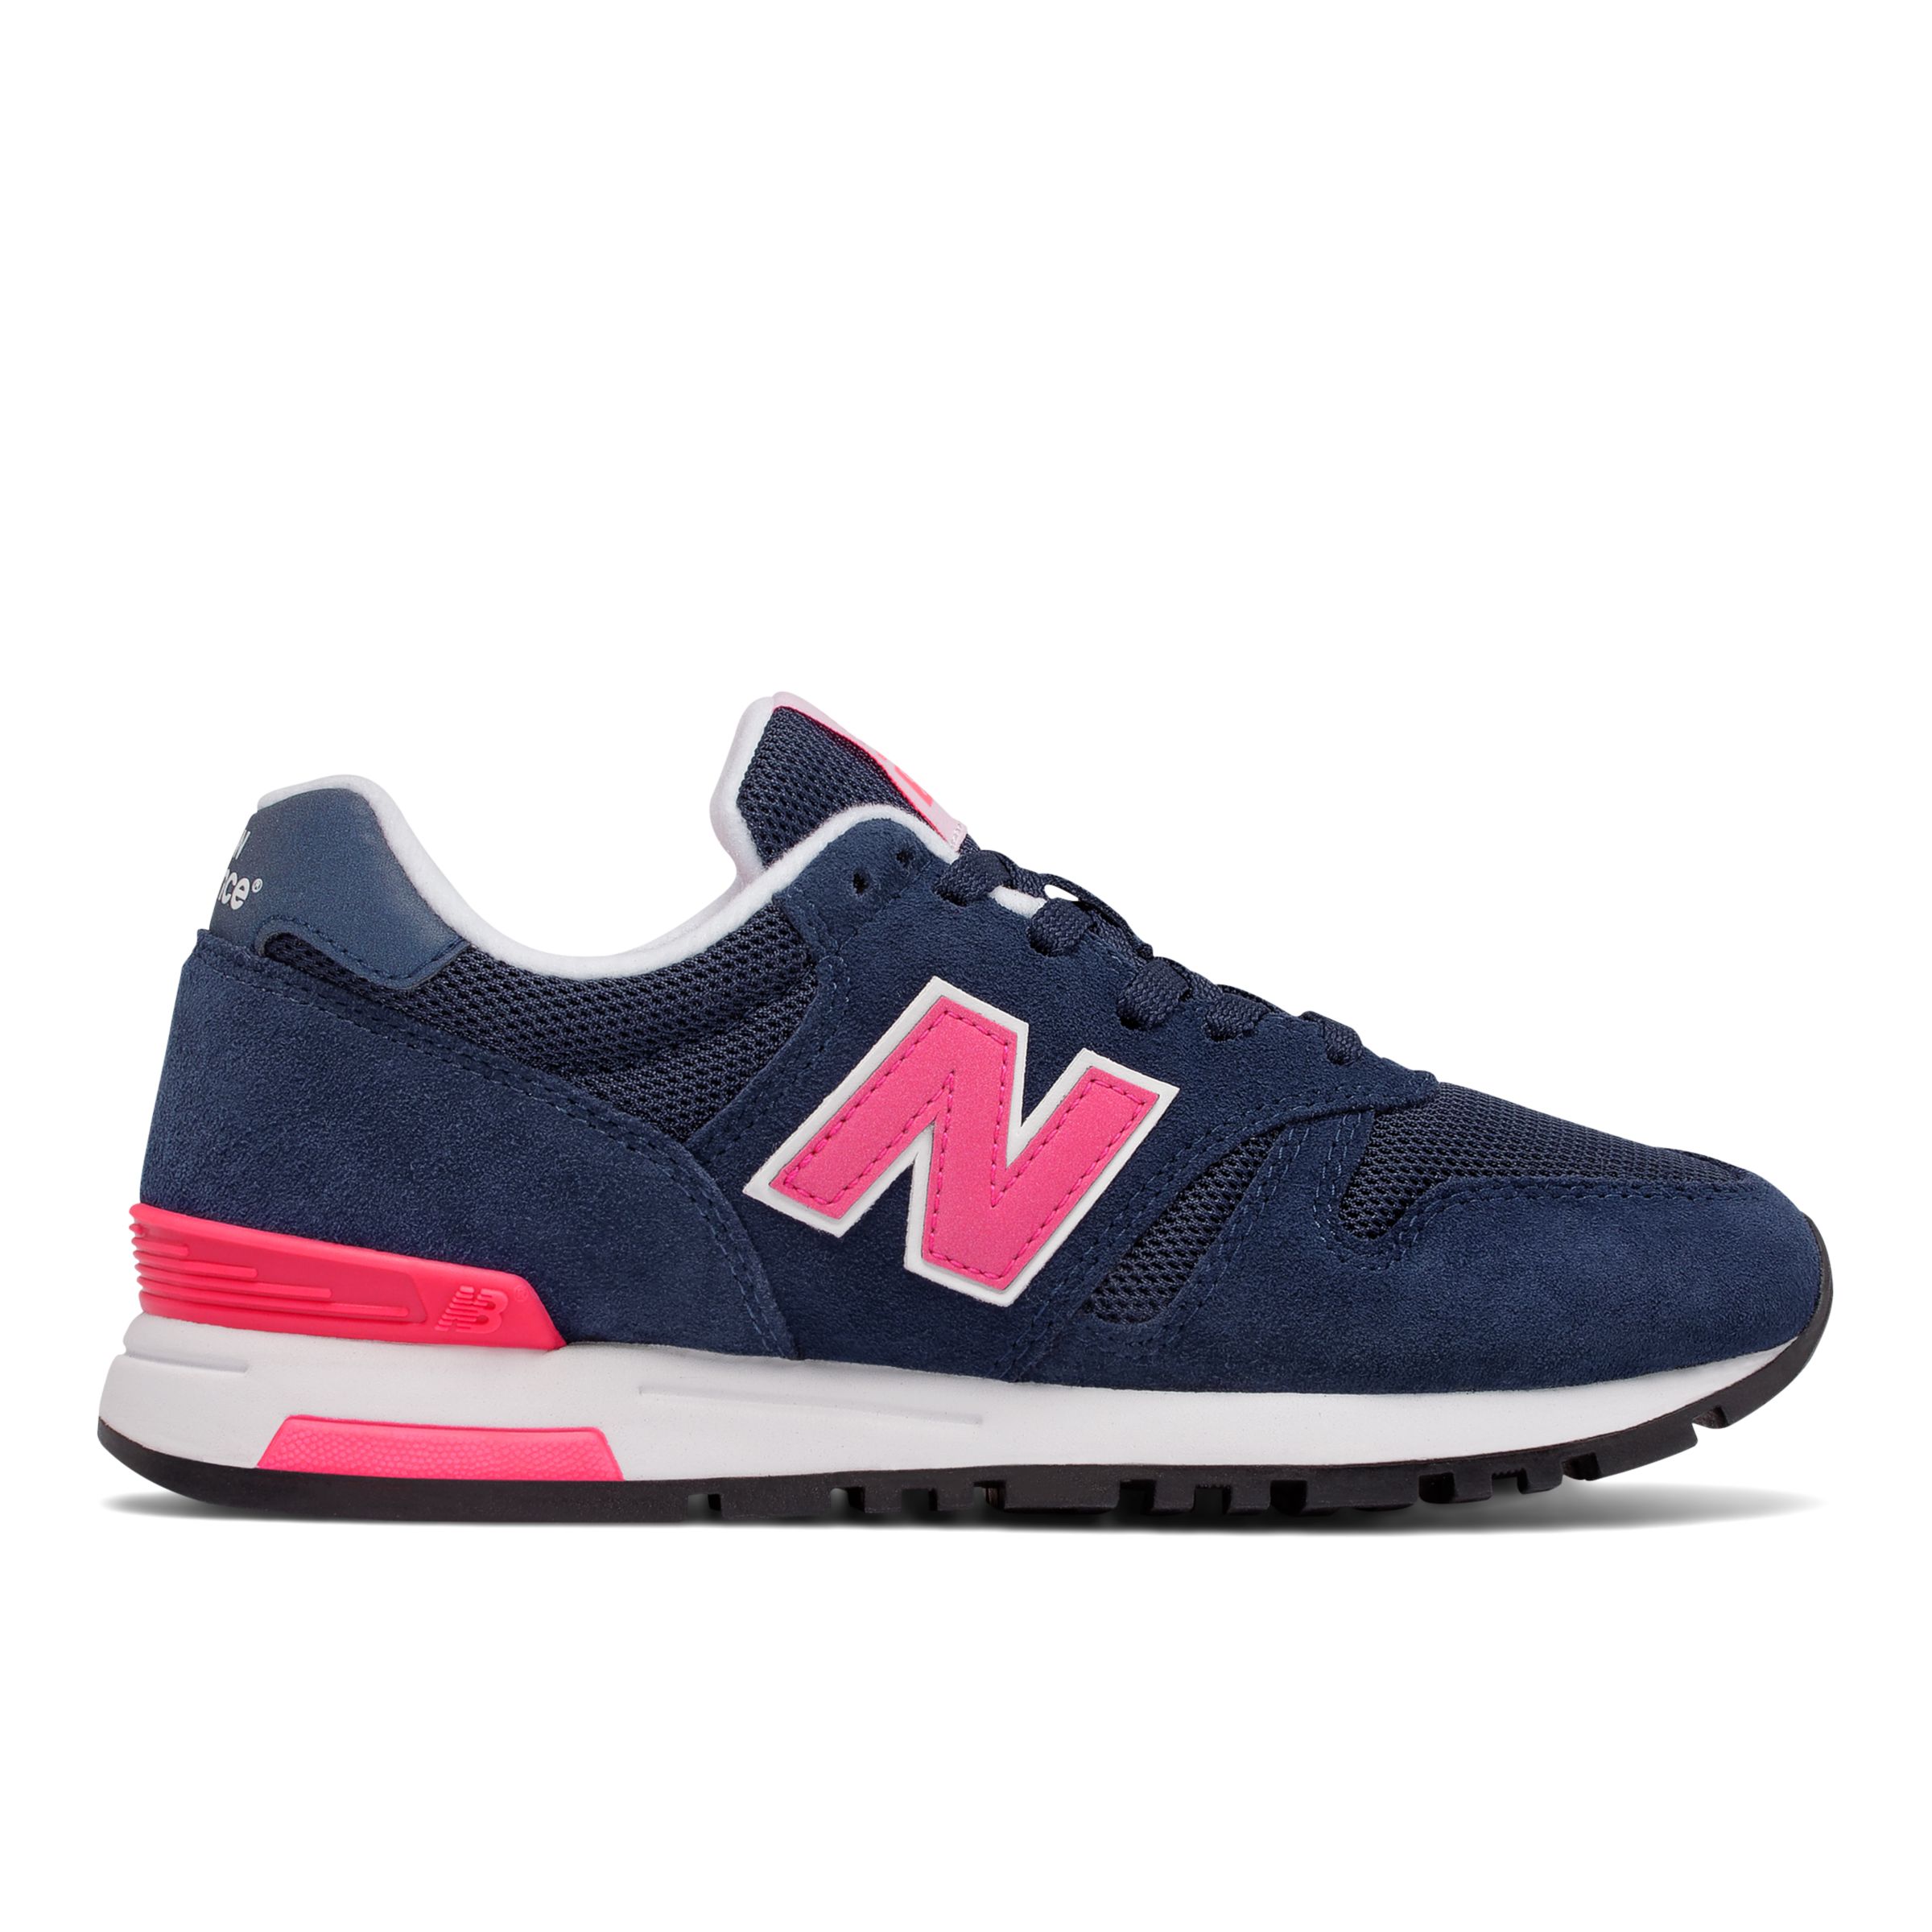 new balance nb 565 review